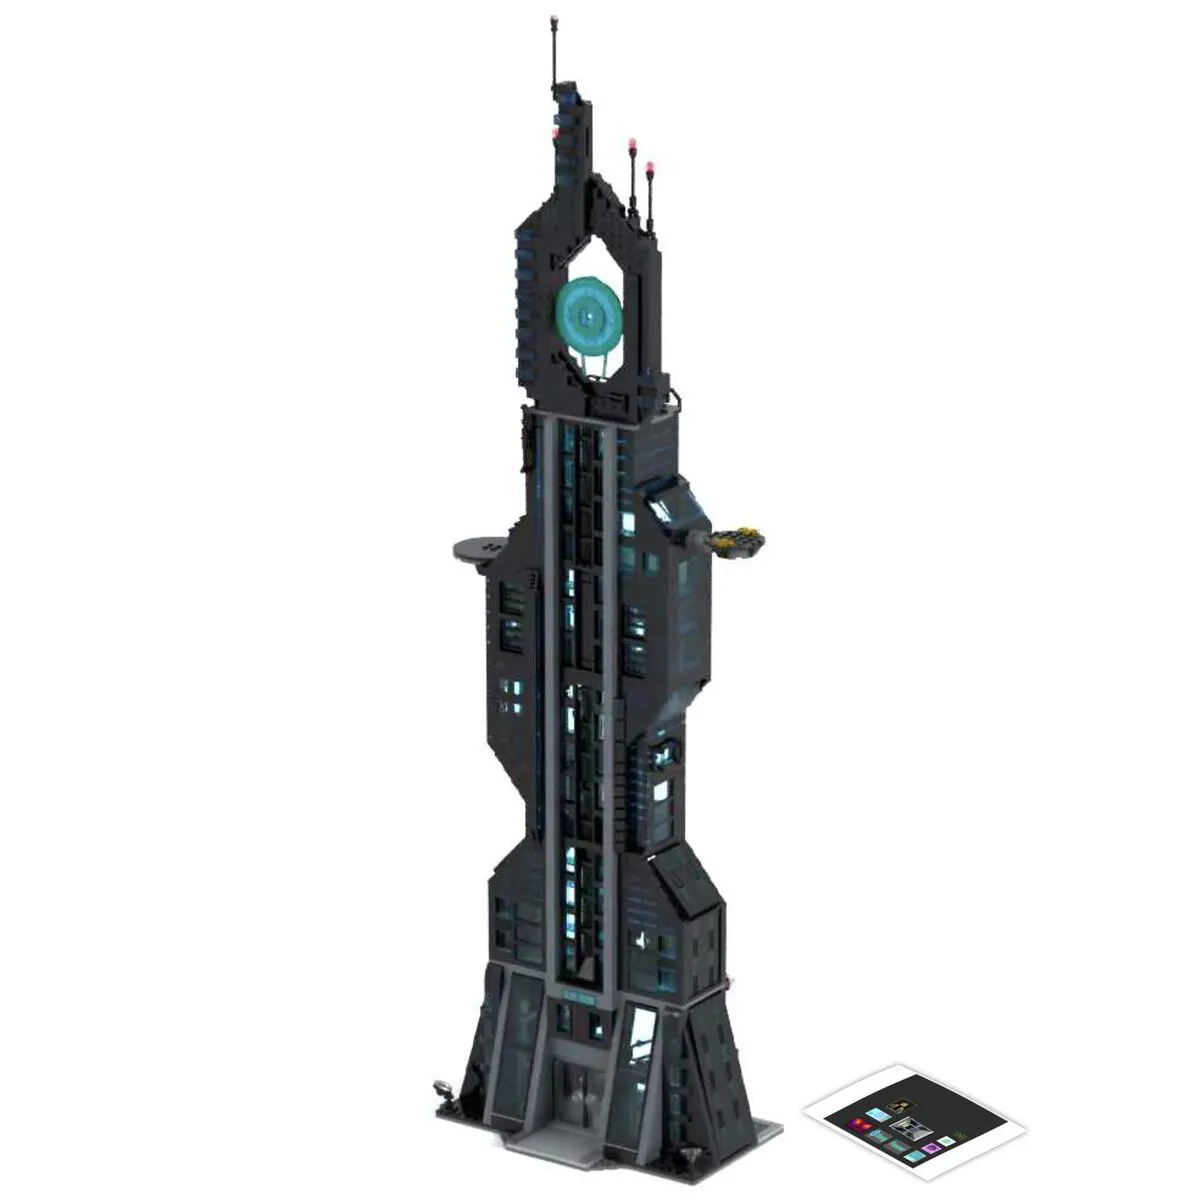 Borg Tower Instructions